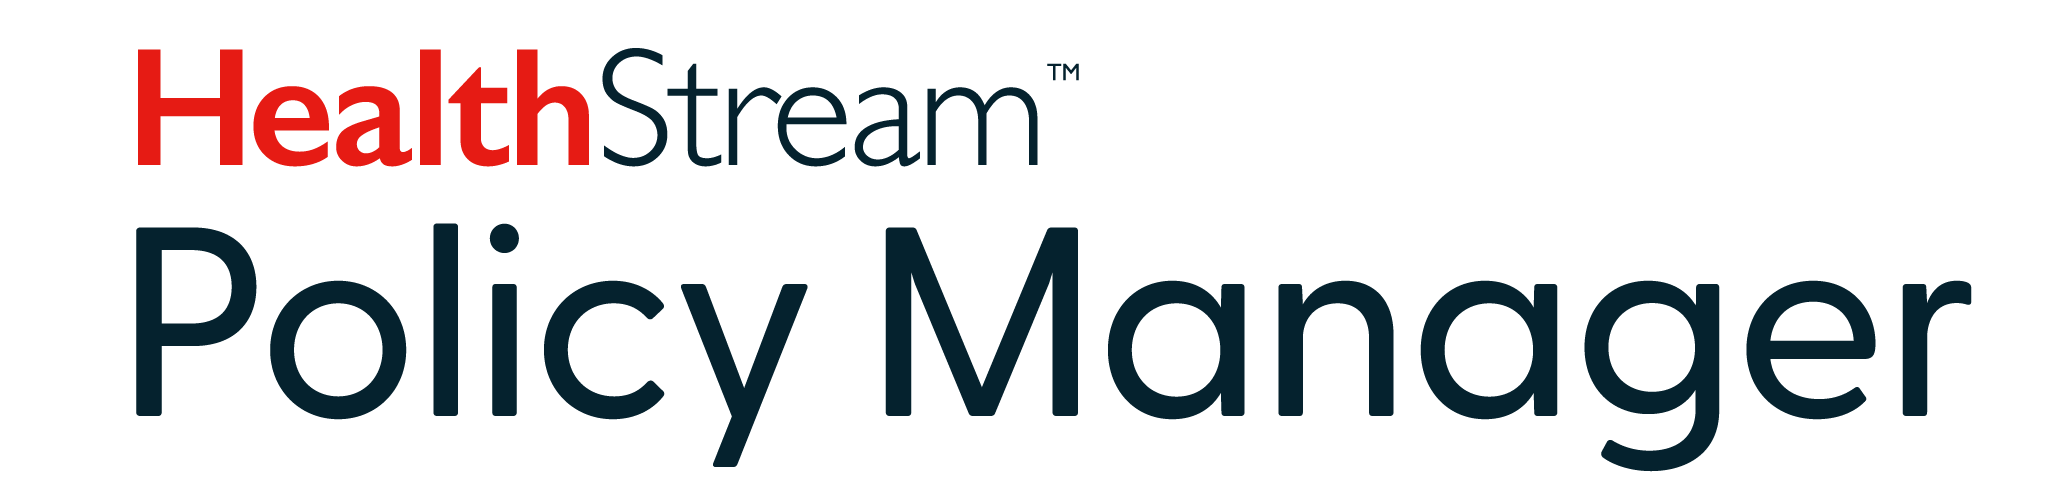 HealthStream Policy Manager